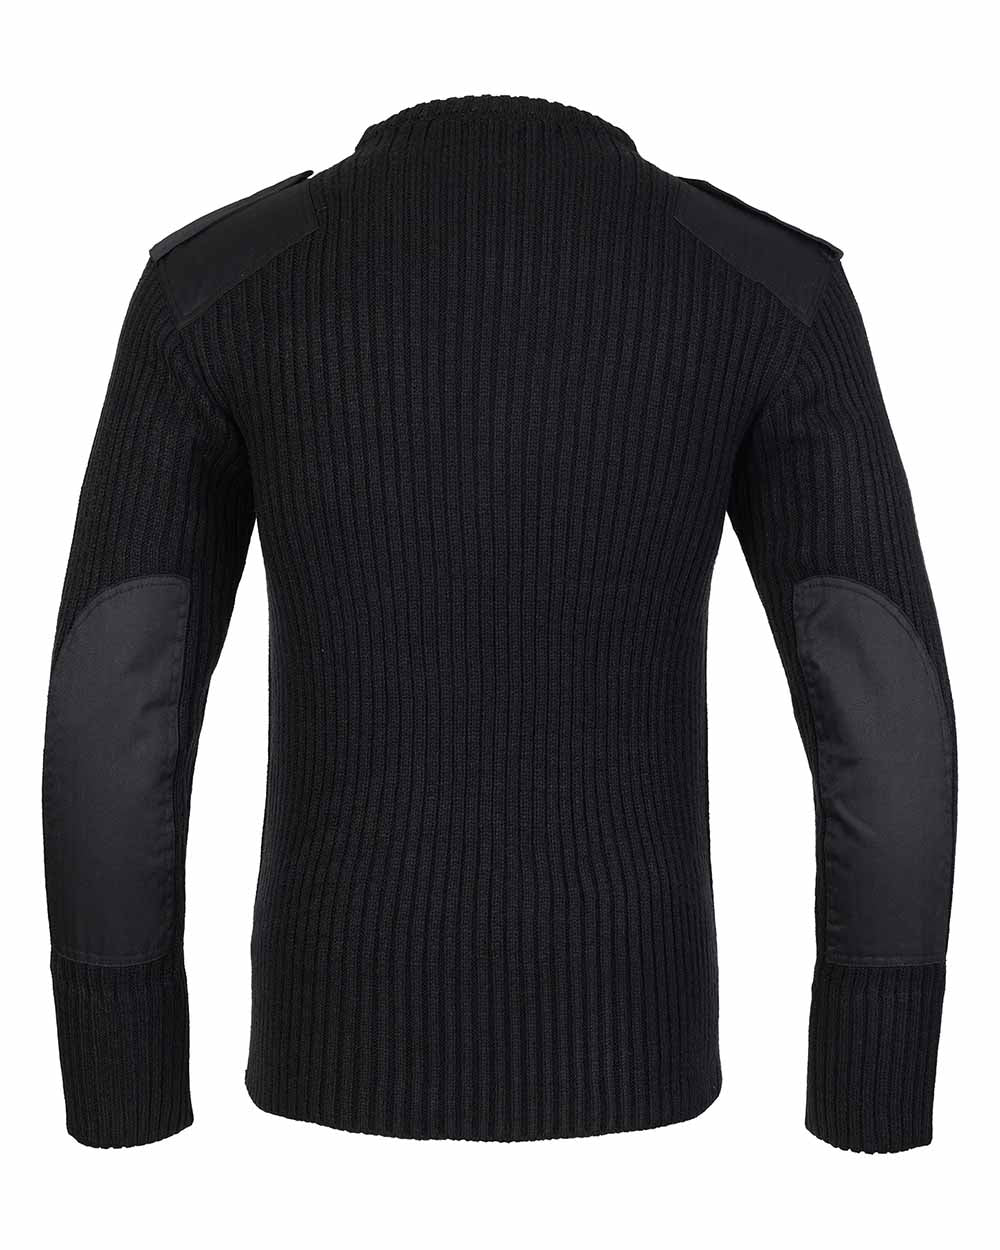 Black Crew Neck Military Style Jumper by Fort 